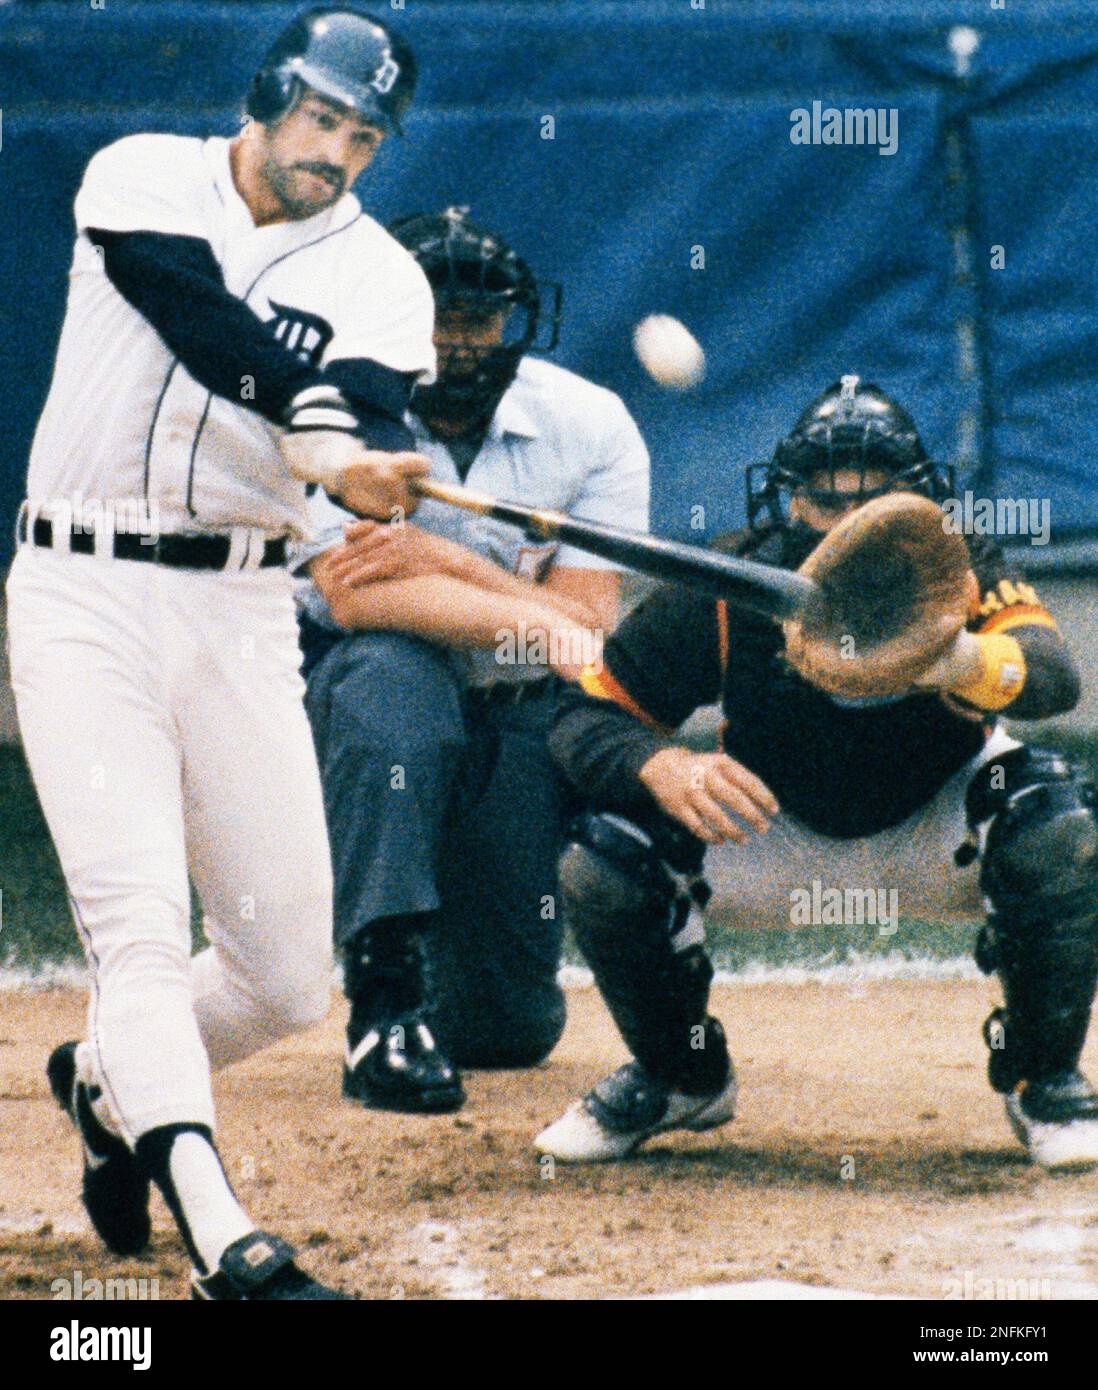 KIRK GIBSON Photo Picture DETROIT Tigers 1984 World Series 